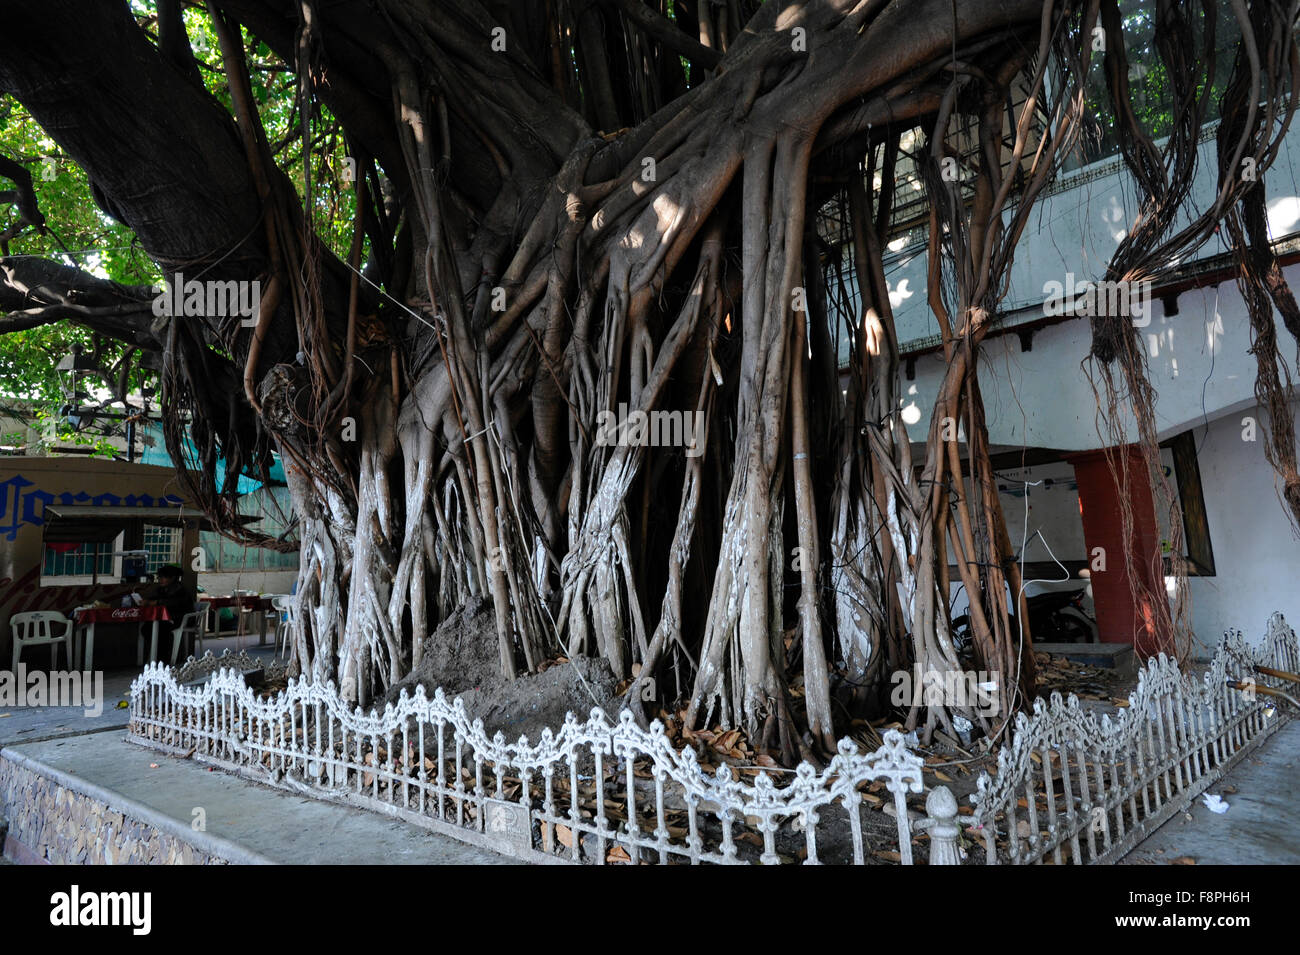 Views in the Zocalo, Acapulco, Mexico.  Old Banyan tree. Stock Photo